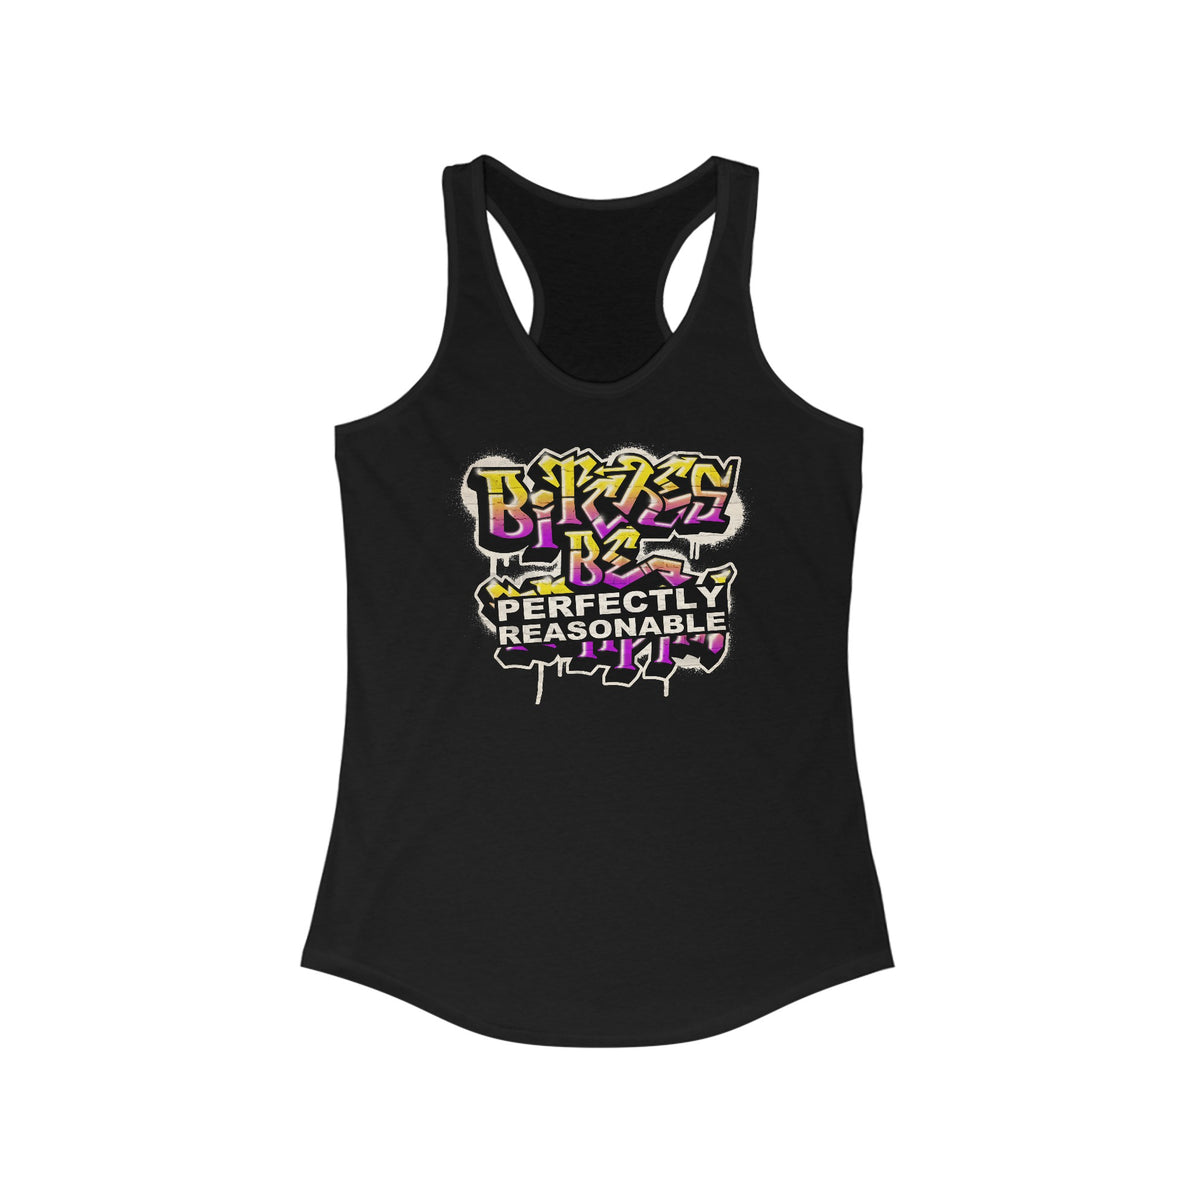 Bitches Be Perfectly Reasonable - Women's Racerback Tank